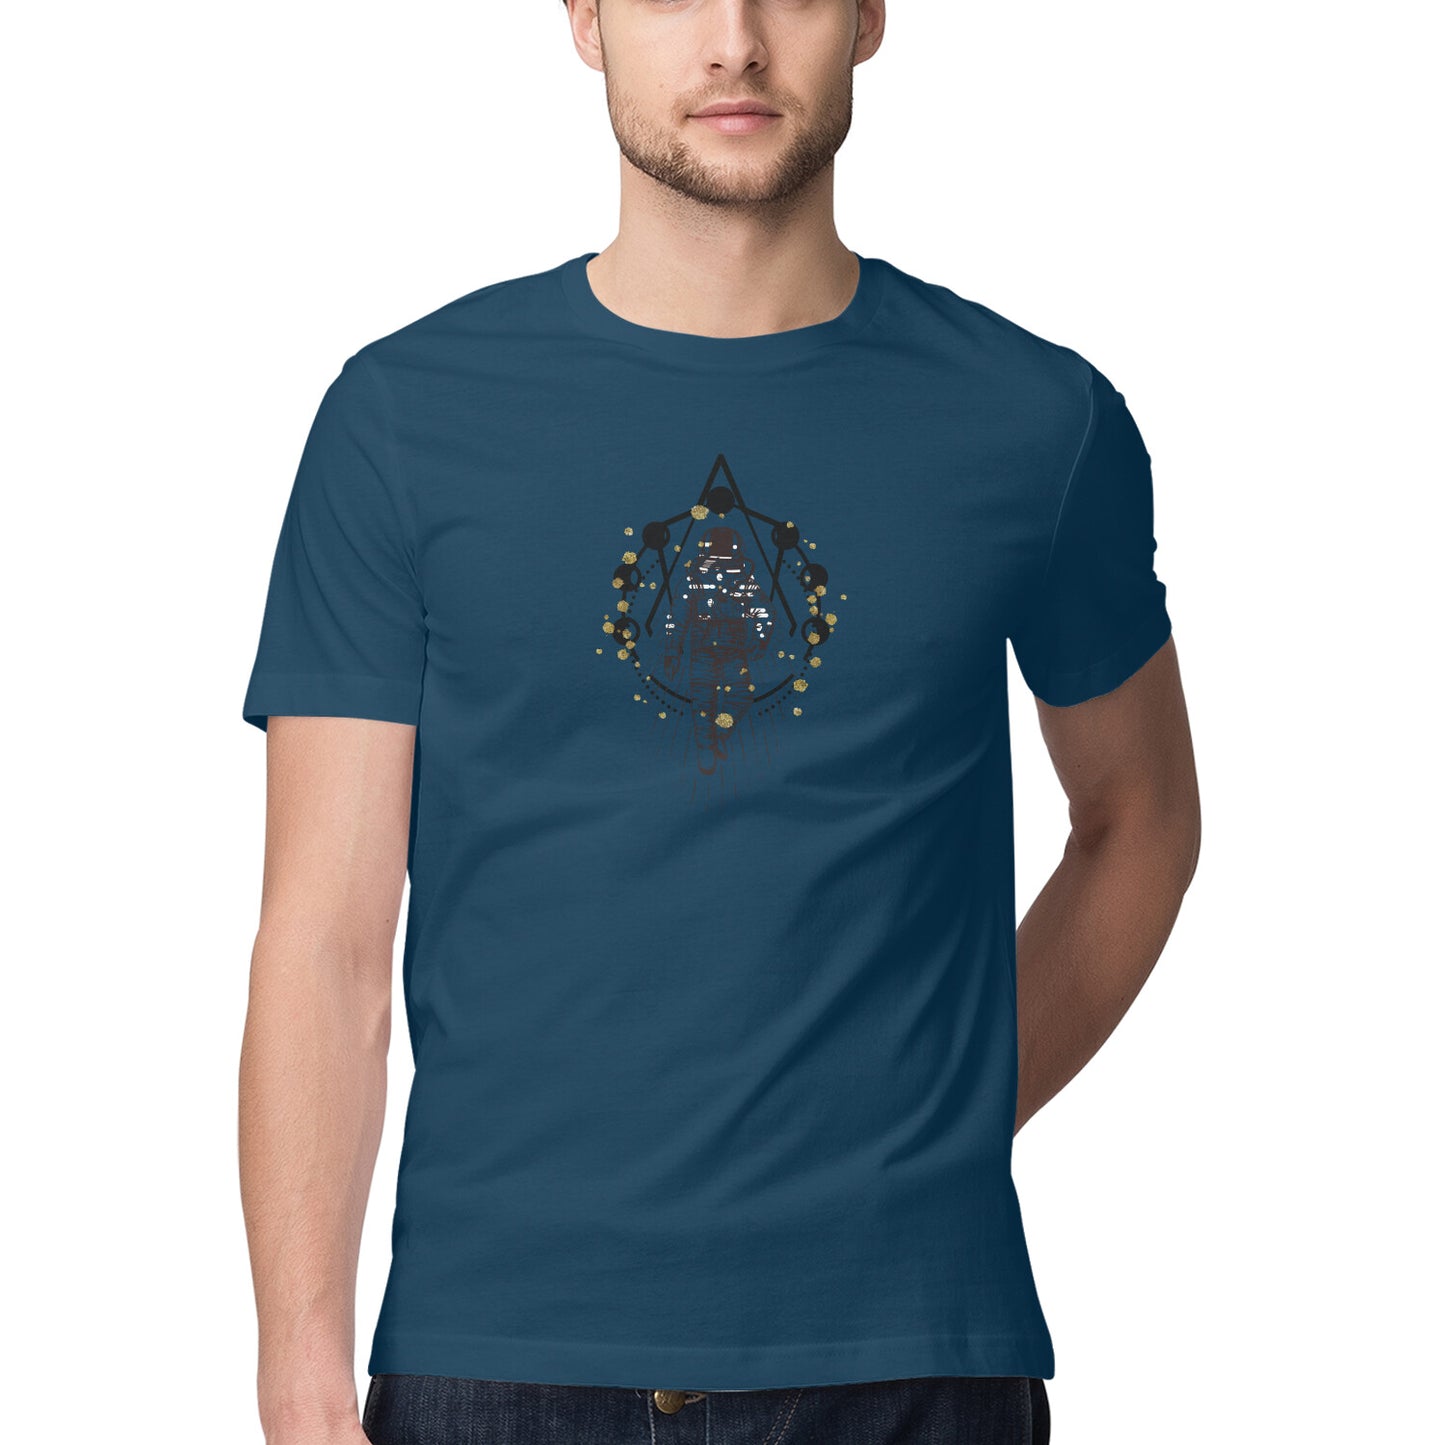 Space Art 17 Printed Graphic T-Shirt